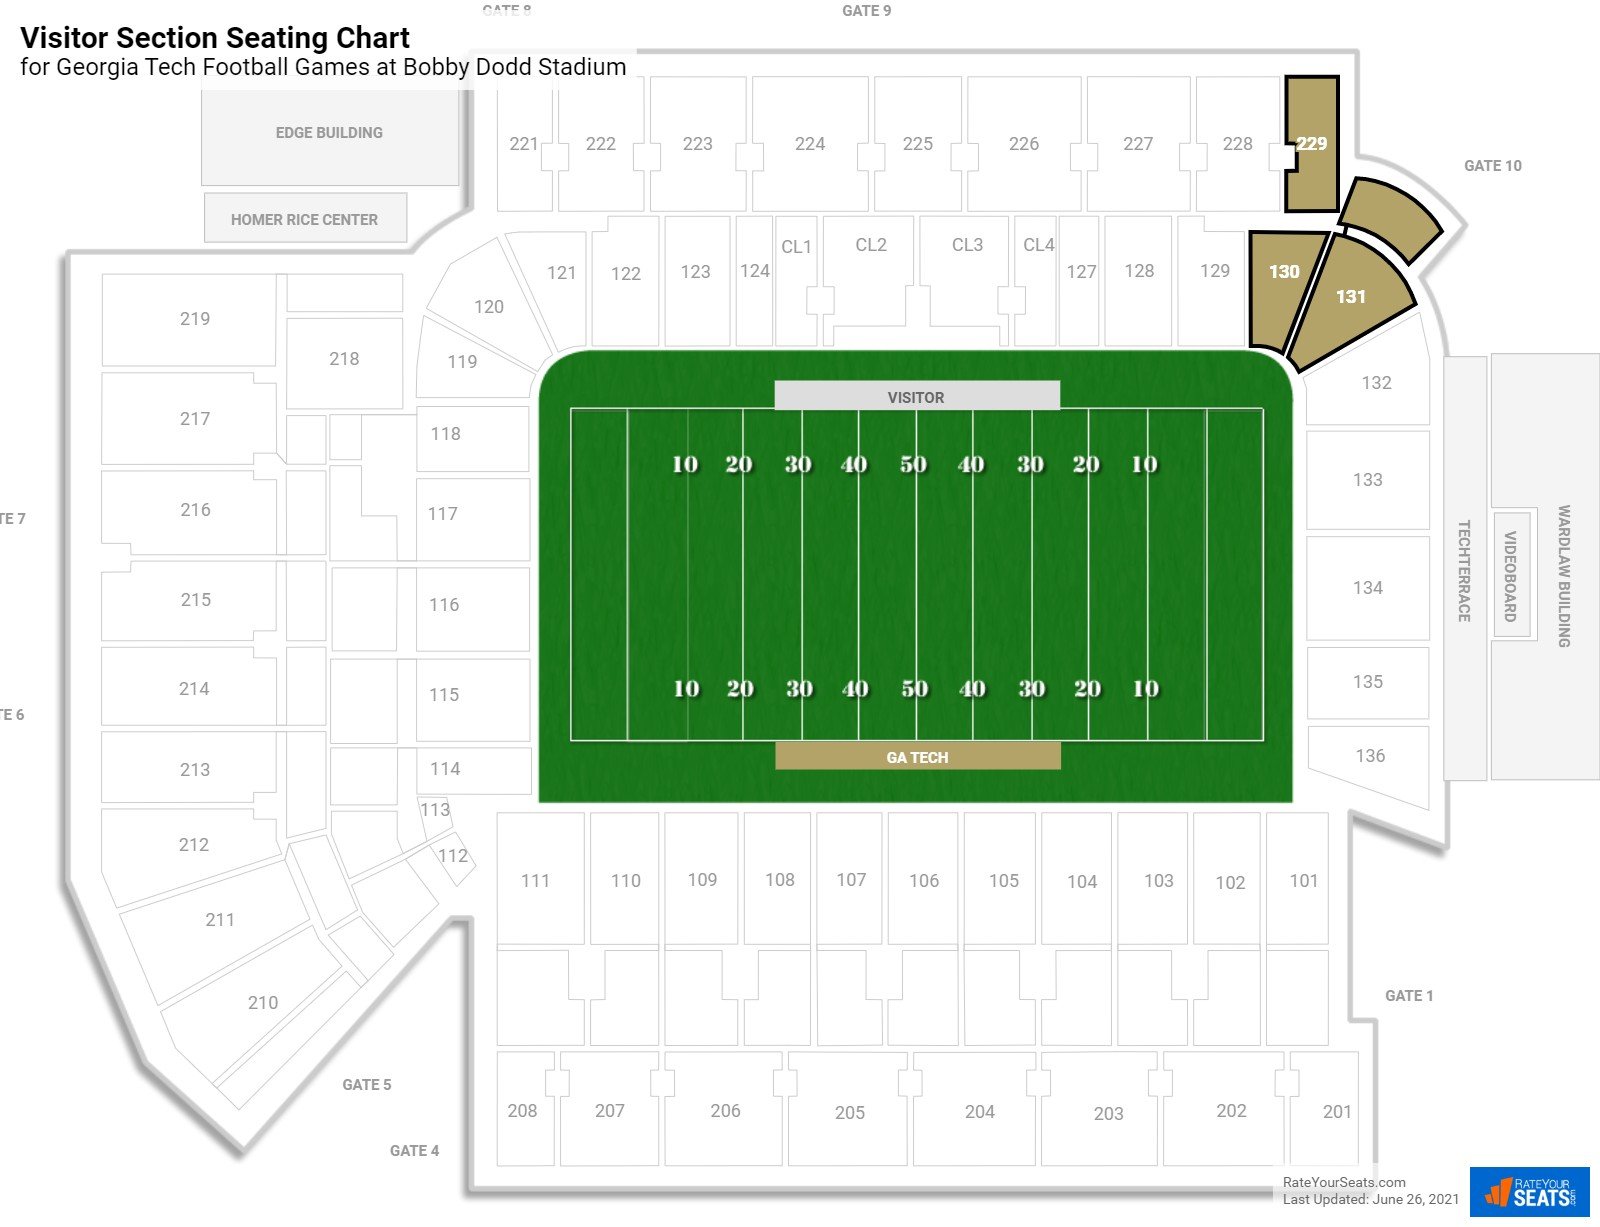 Georgia Tech Visitor Section Seating Chart at Bobby Dodd Stadium